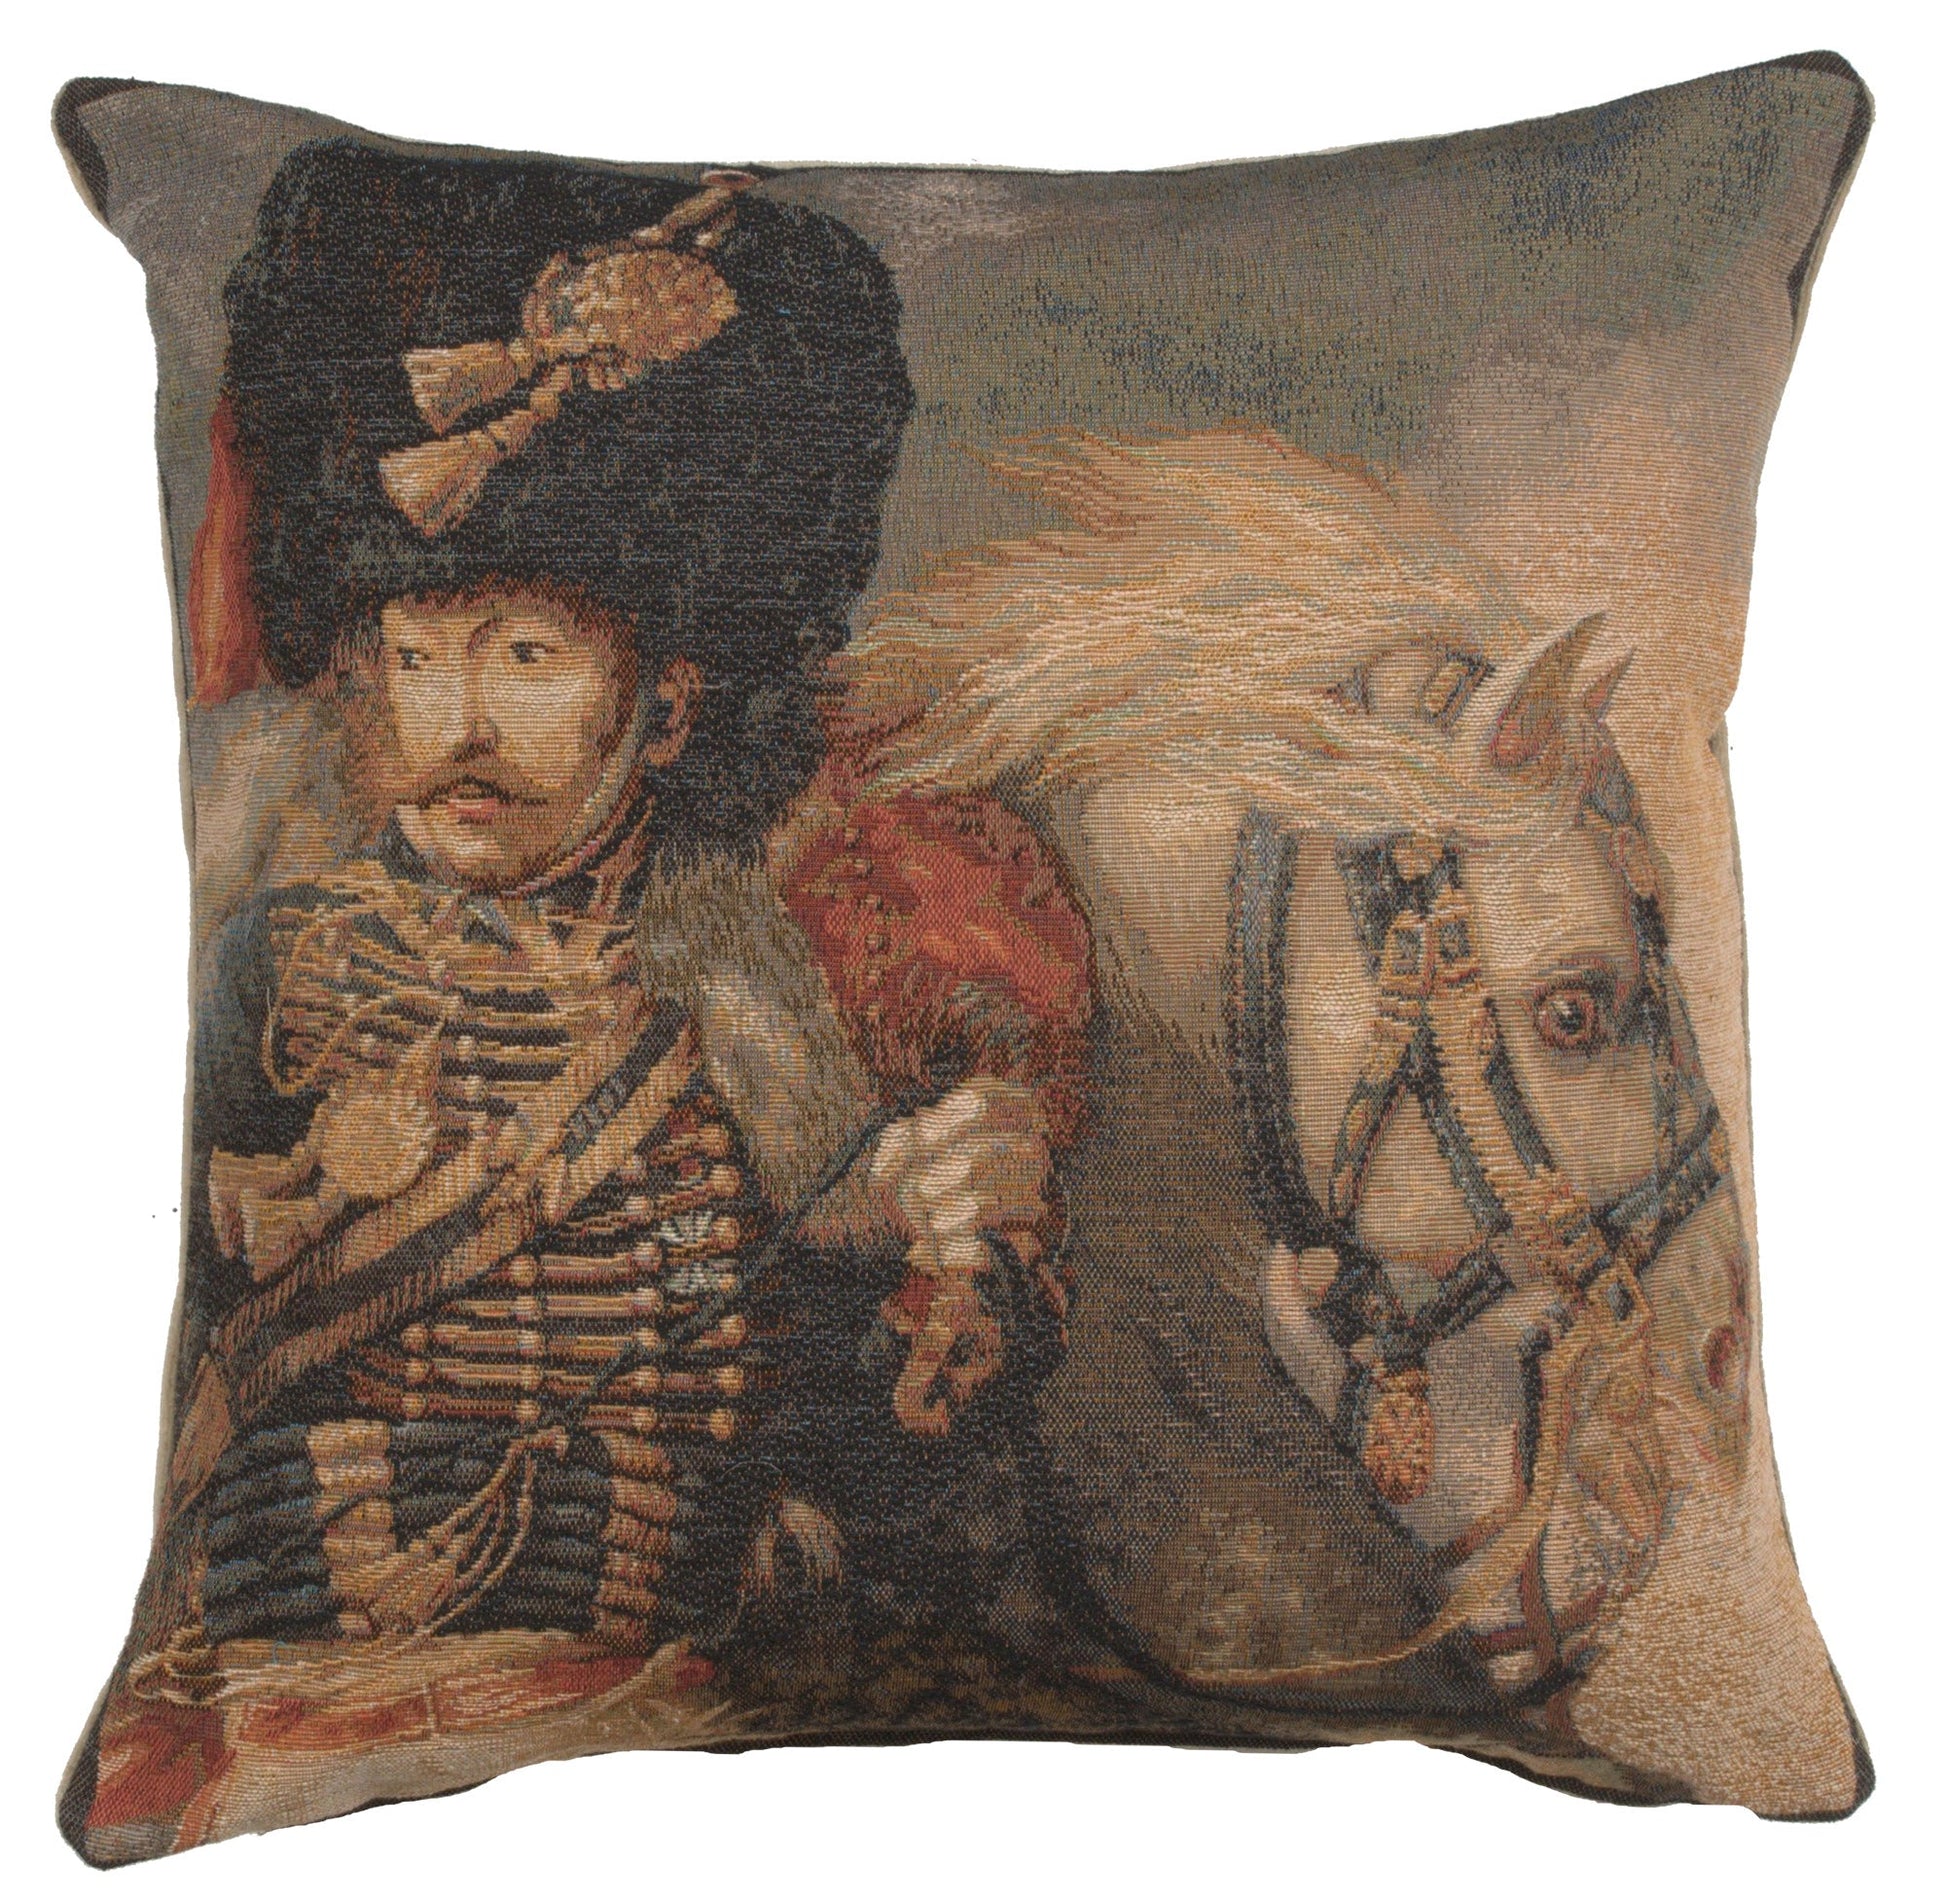 Officer of the Guard French Cushion - RoseStraya.com